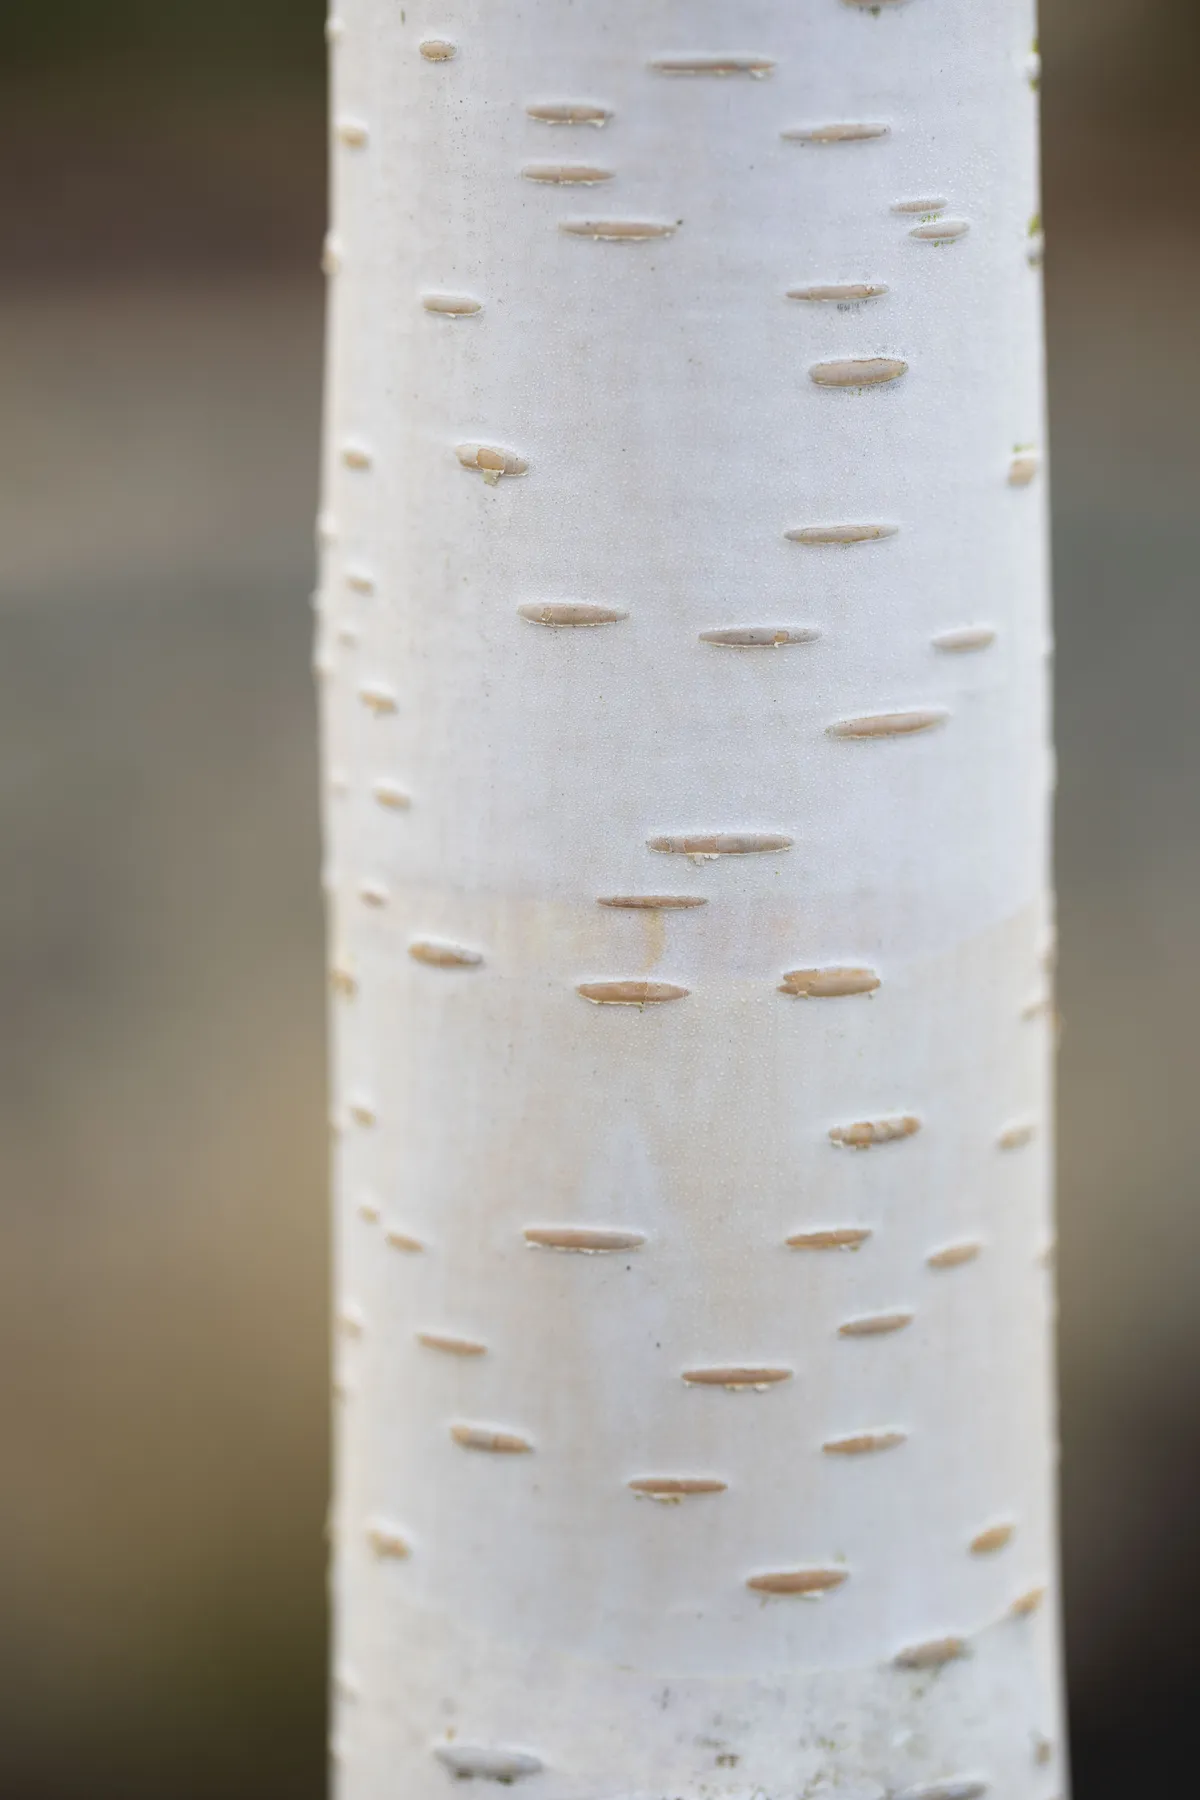 Betula utilis var. jacquemontii An elegant deciduous tree with small leaves and spring catkins, although it’s often grown for its striking white bark that glows at dusk. 10m x 6m. RHS H7, USDA 5a-6b.